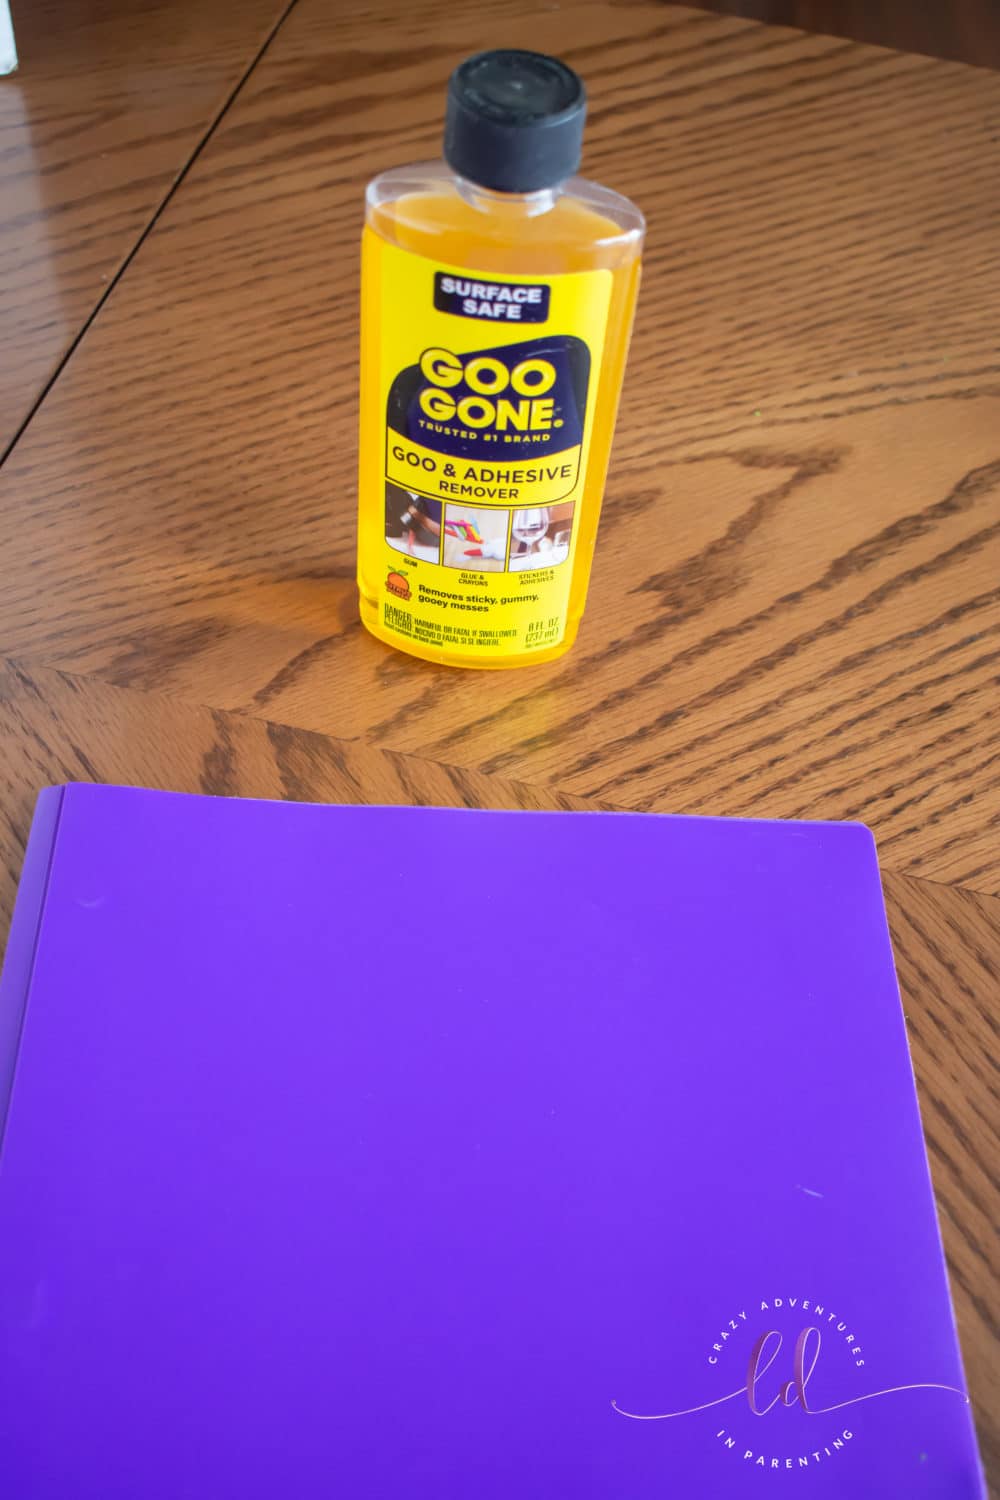 Folder with Sticker After Using Goo Gone